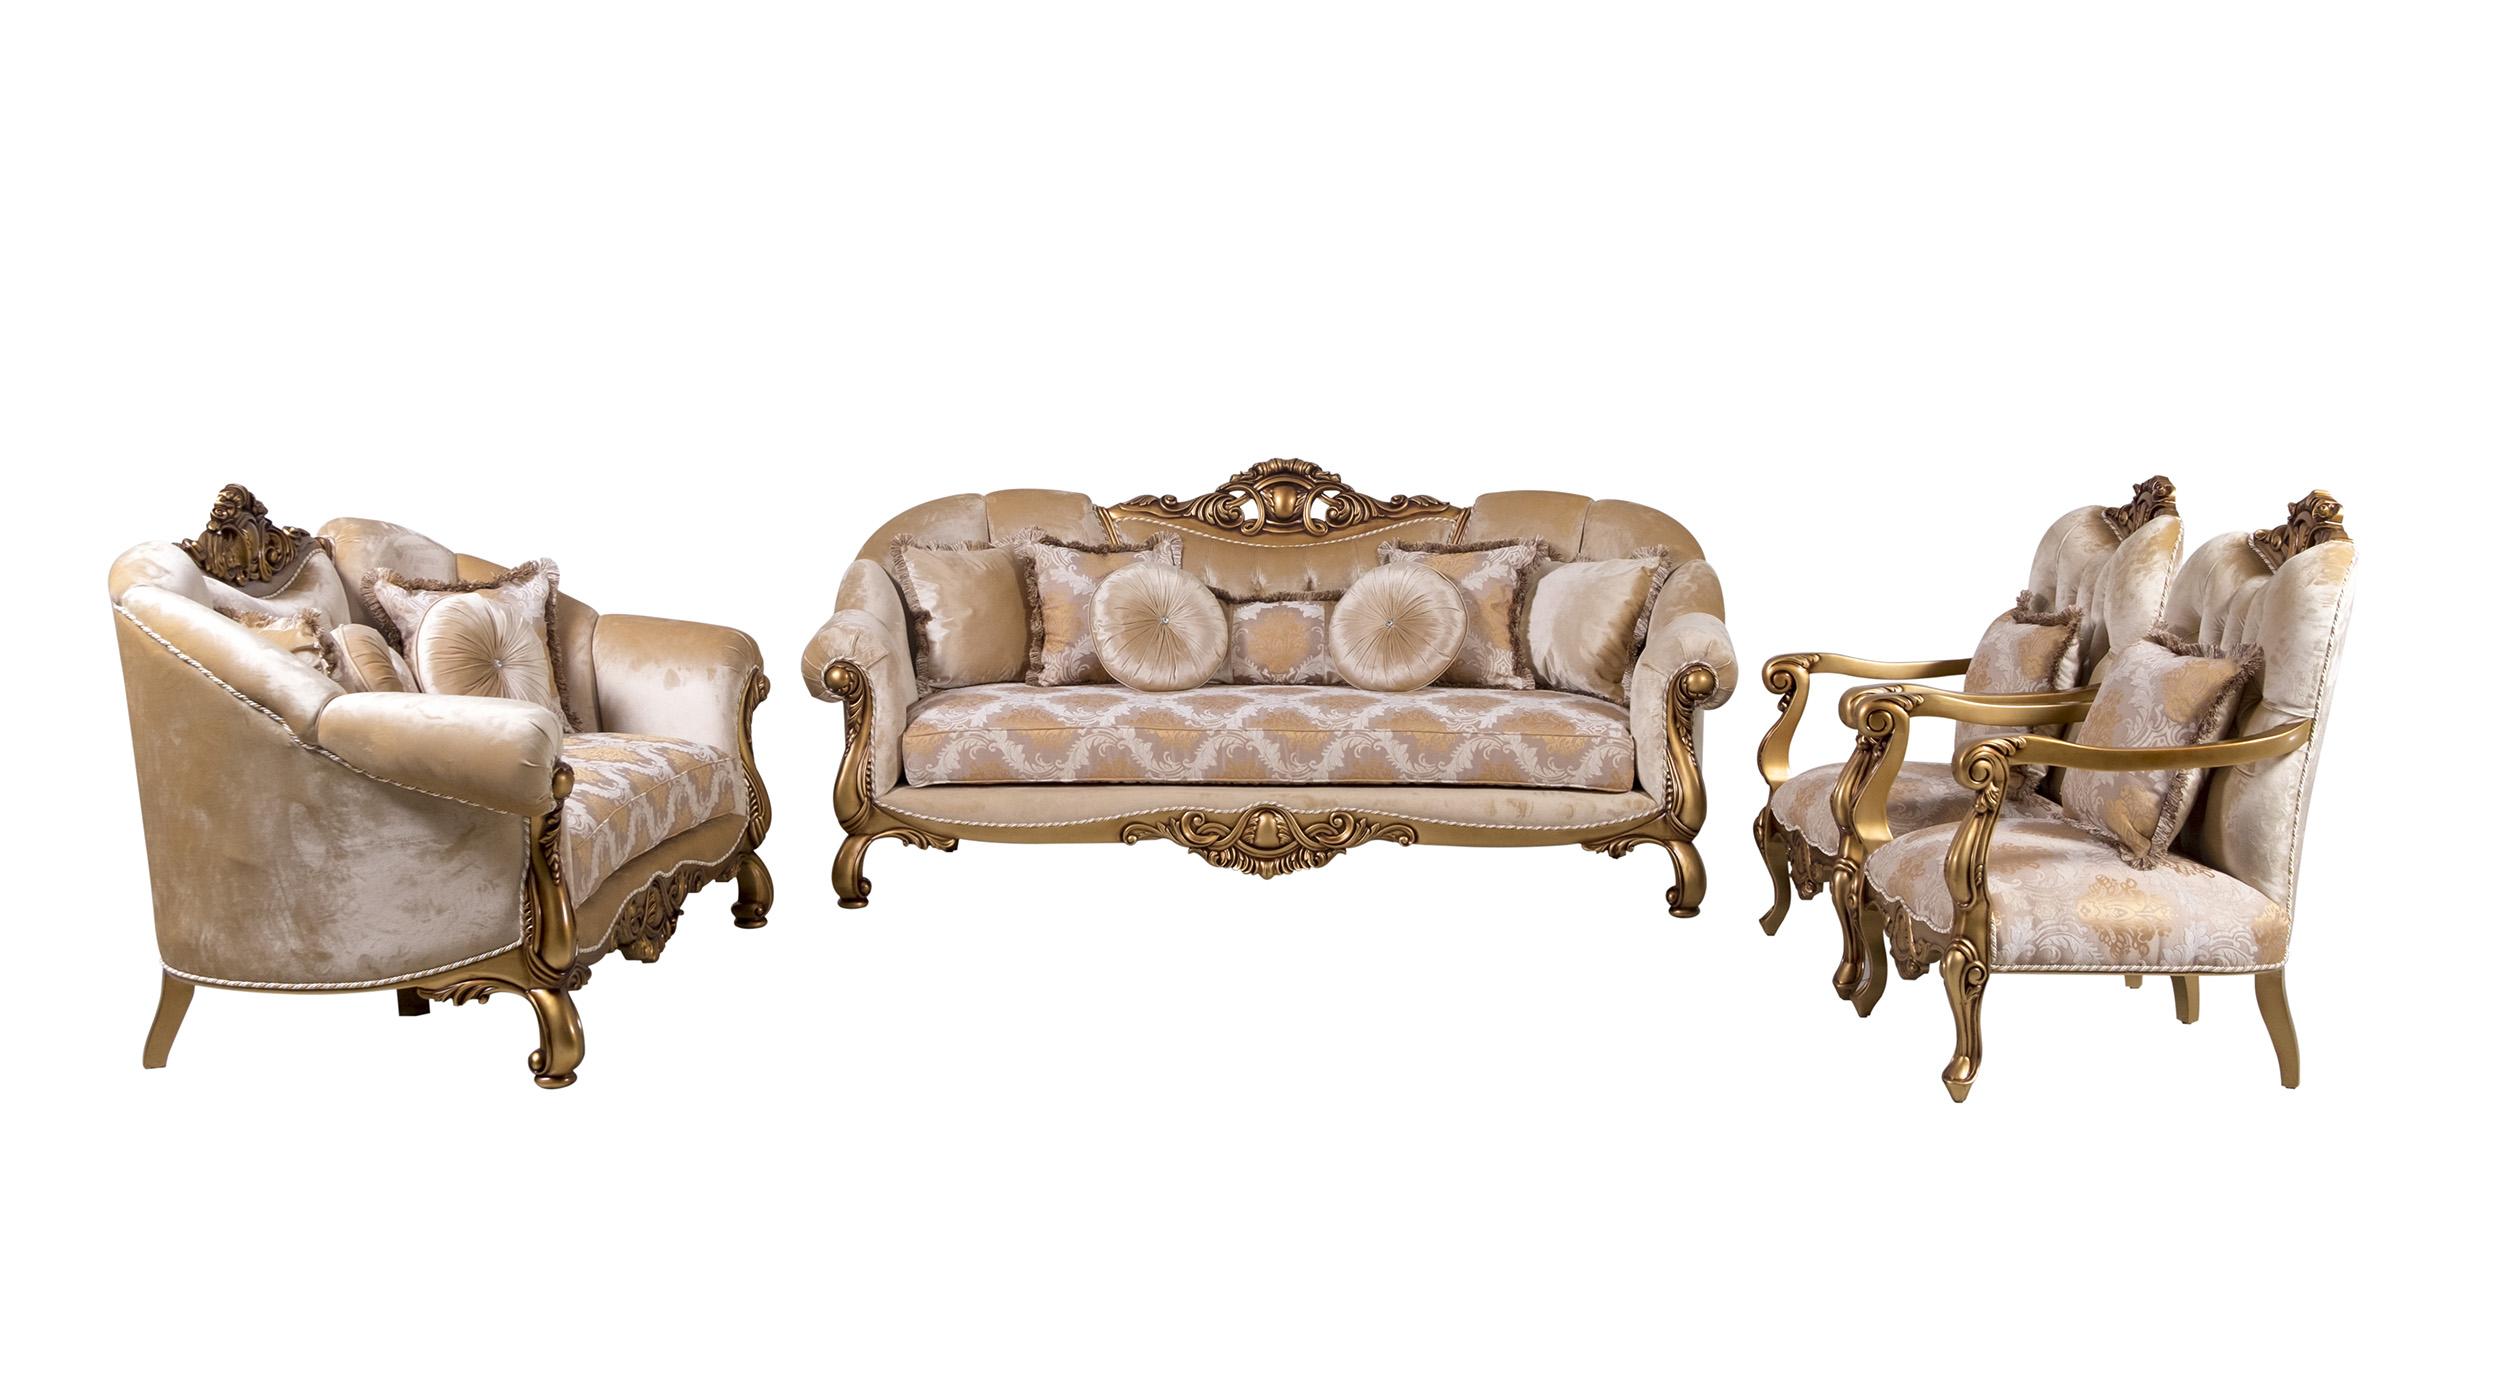 Classic, Traditional Sofa Set GOLDEN KNIGHTS 4590-Set-4 in Gold, Bronze, Beige Fabric